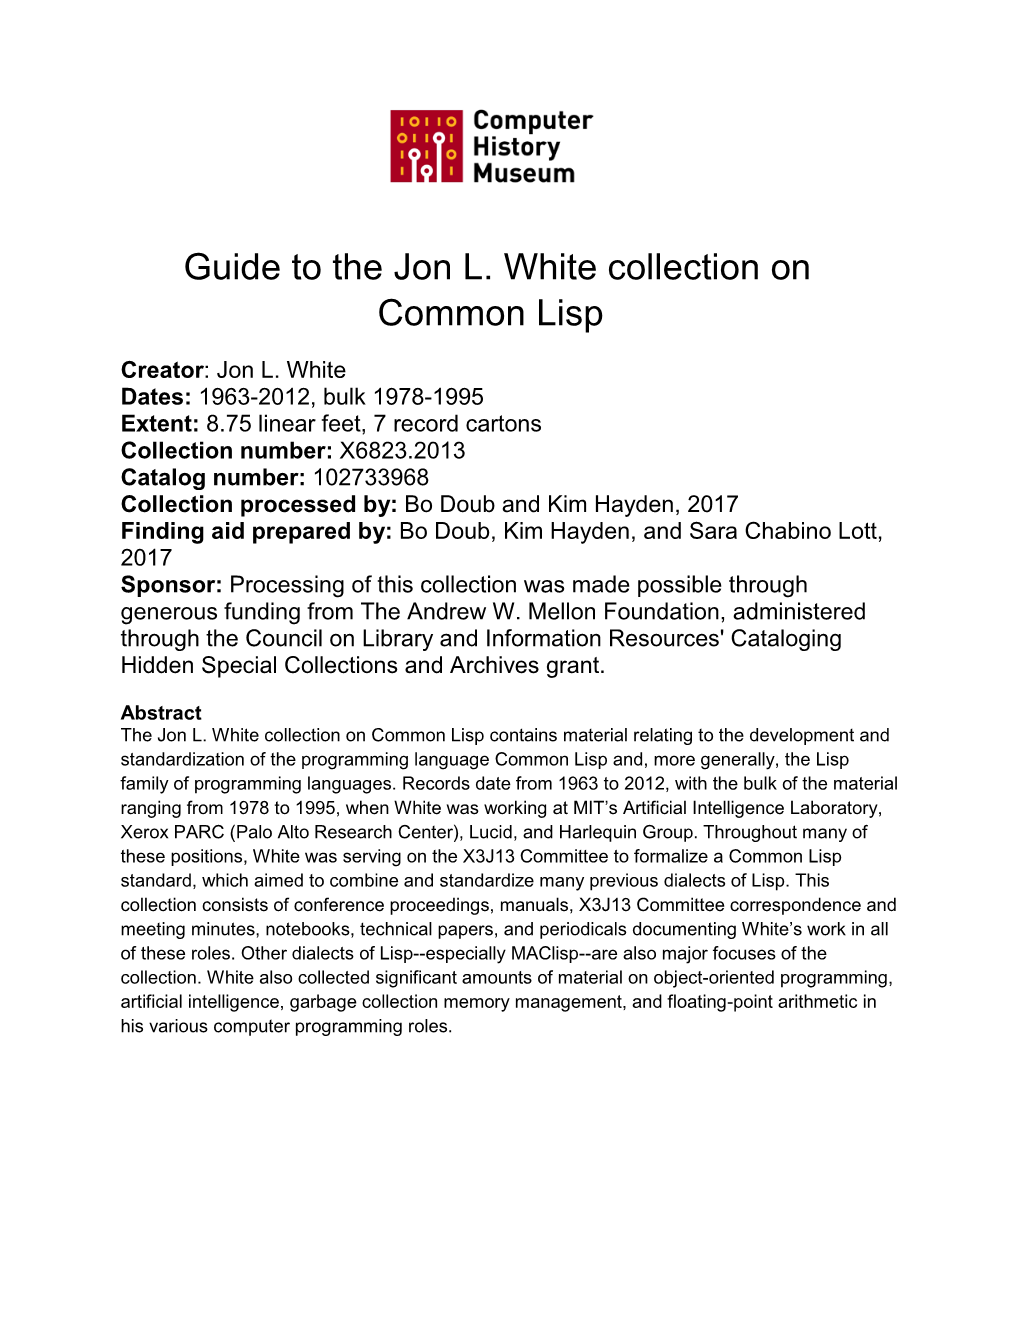 Guide to the Jon L. White Collection on Common Lisp, 1963-2012